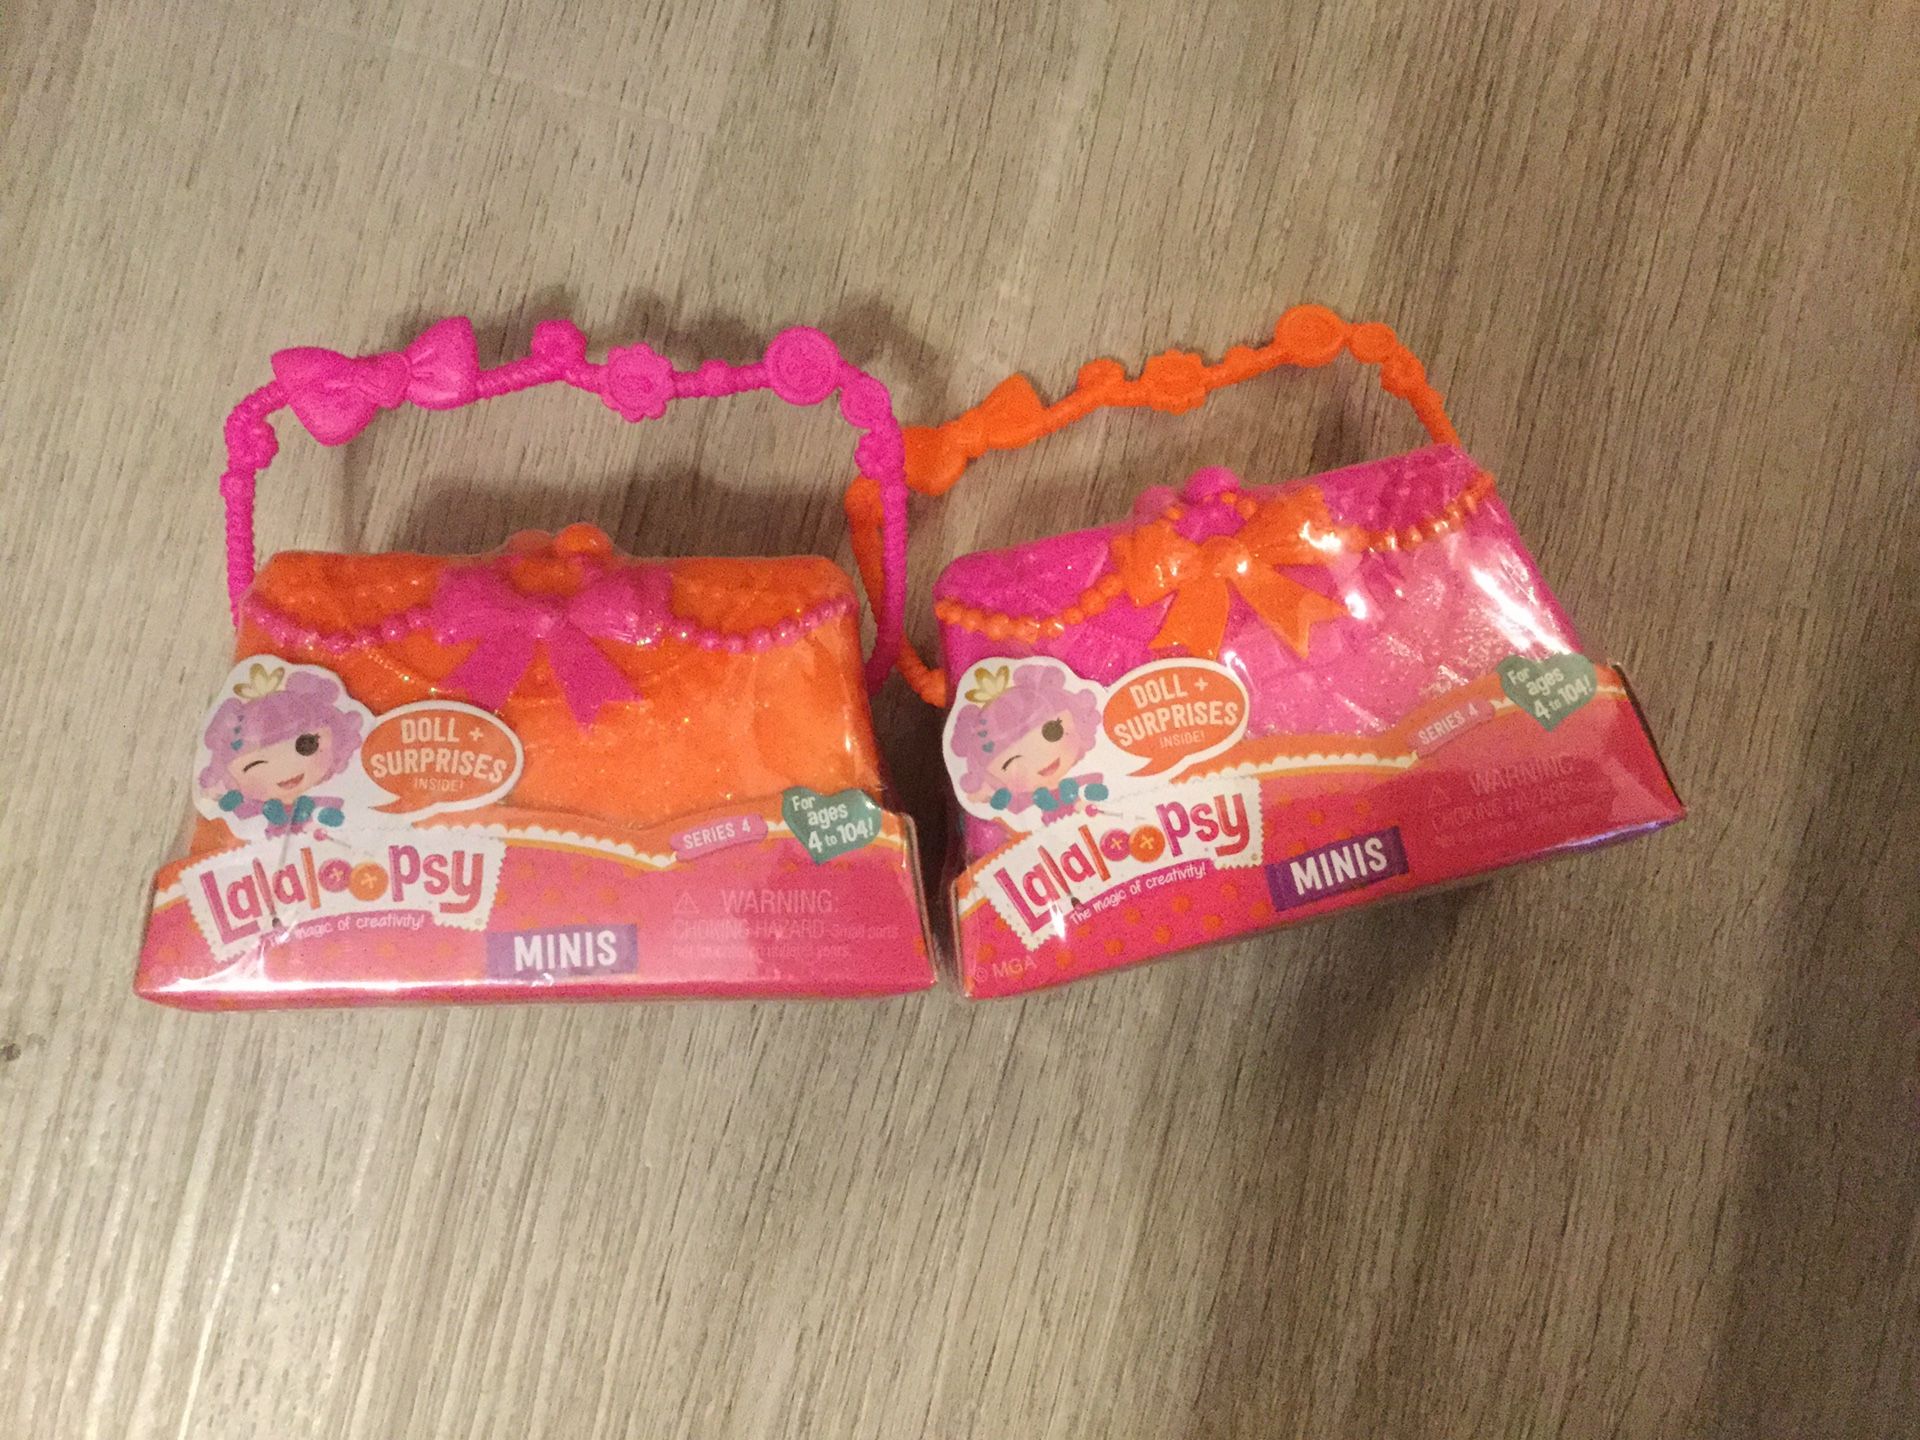 (2) NEW SERIES 4 LALALOOPSY DOLL SURPRISE MINIS (Purse shaped) mystery /blind